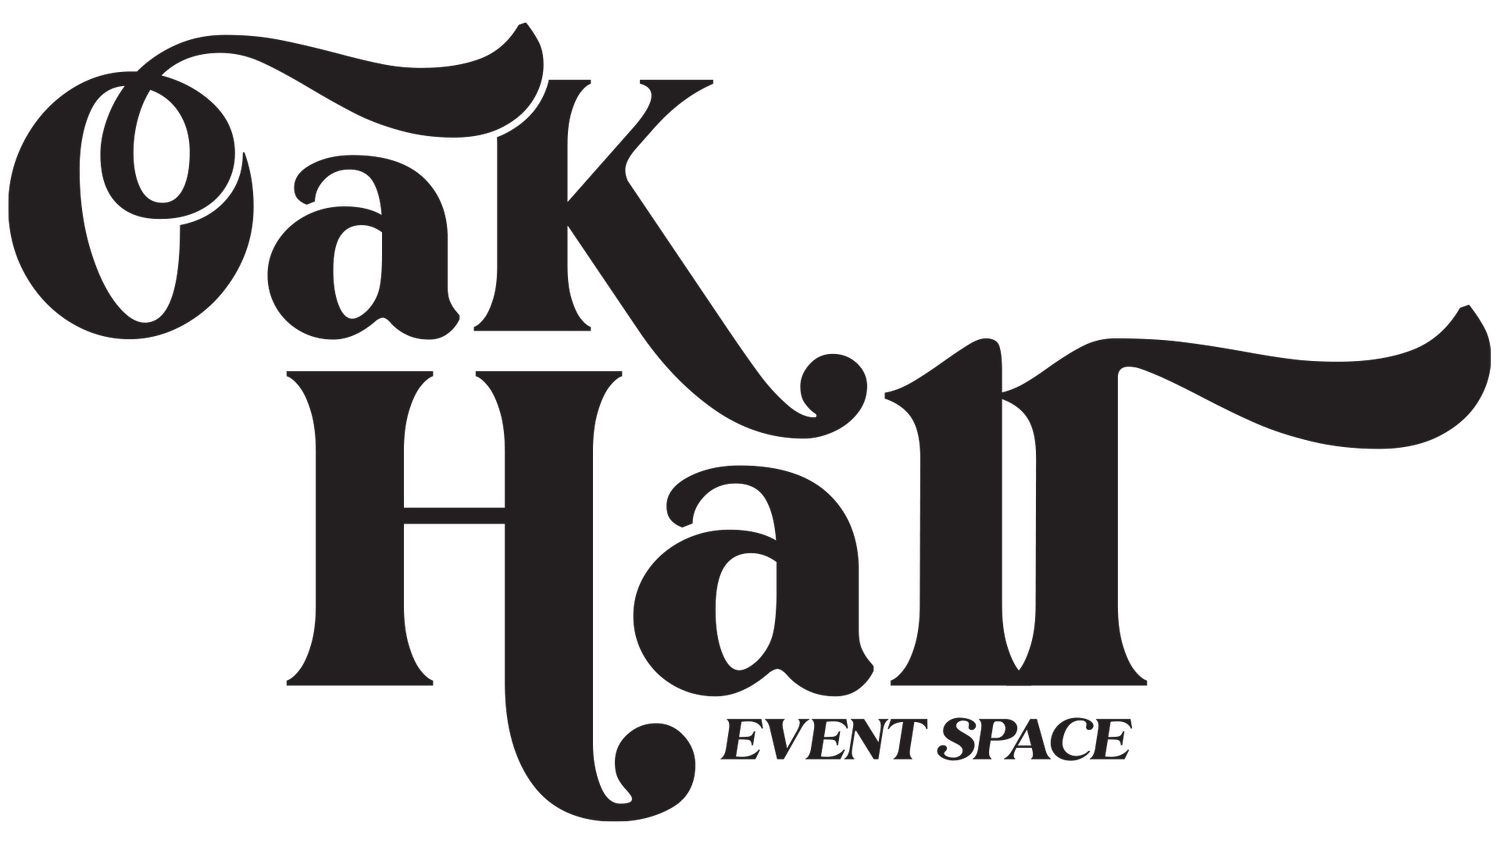 Oak Hall Event Space